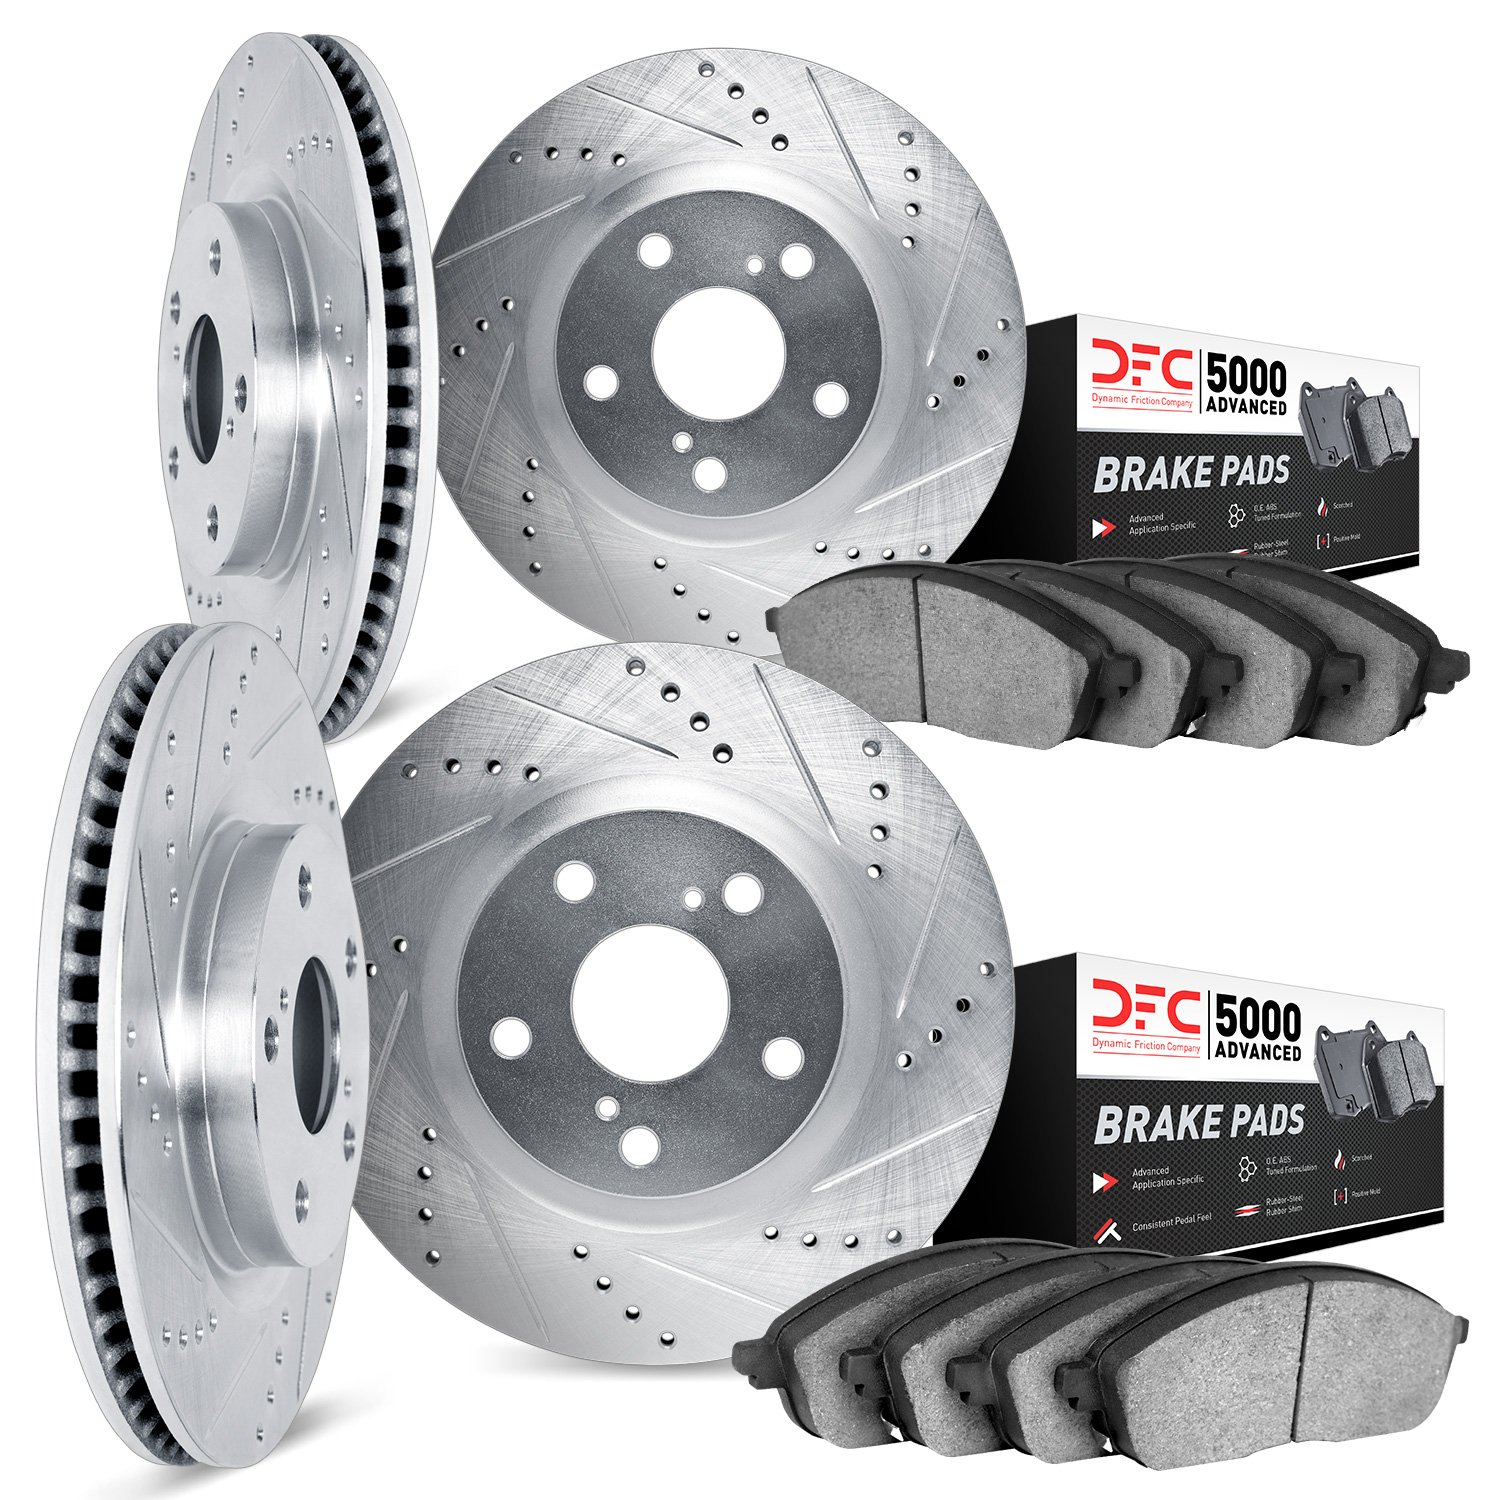 7504-67117 Drilled/Slotted Brake Rotors w/5000 Advanced Brake Pads Kit [Silver], Fits Select Infiniti/Nissan, Position: Front an